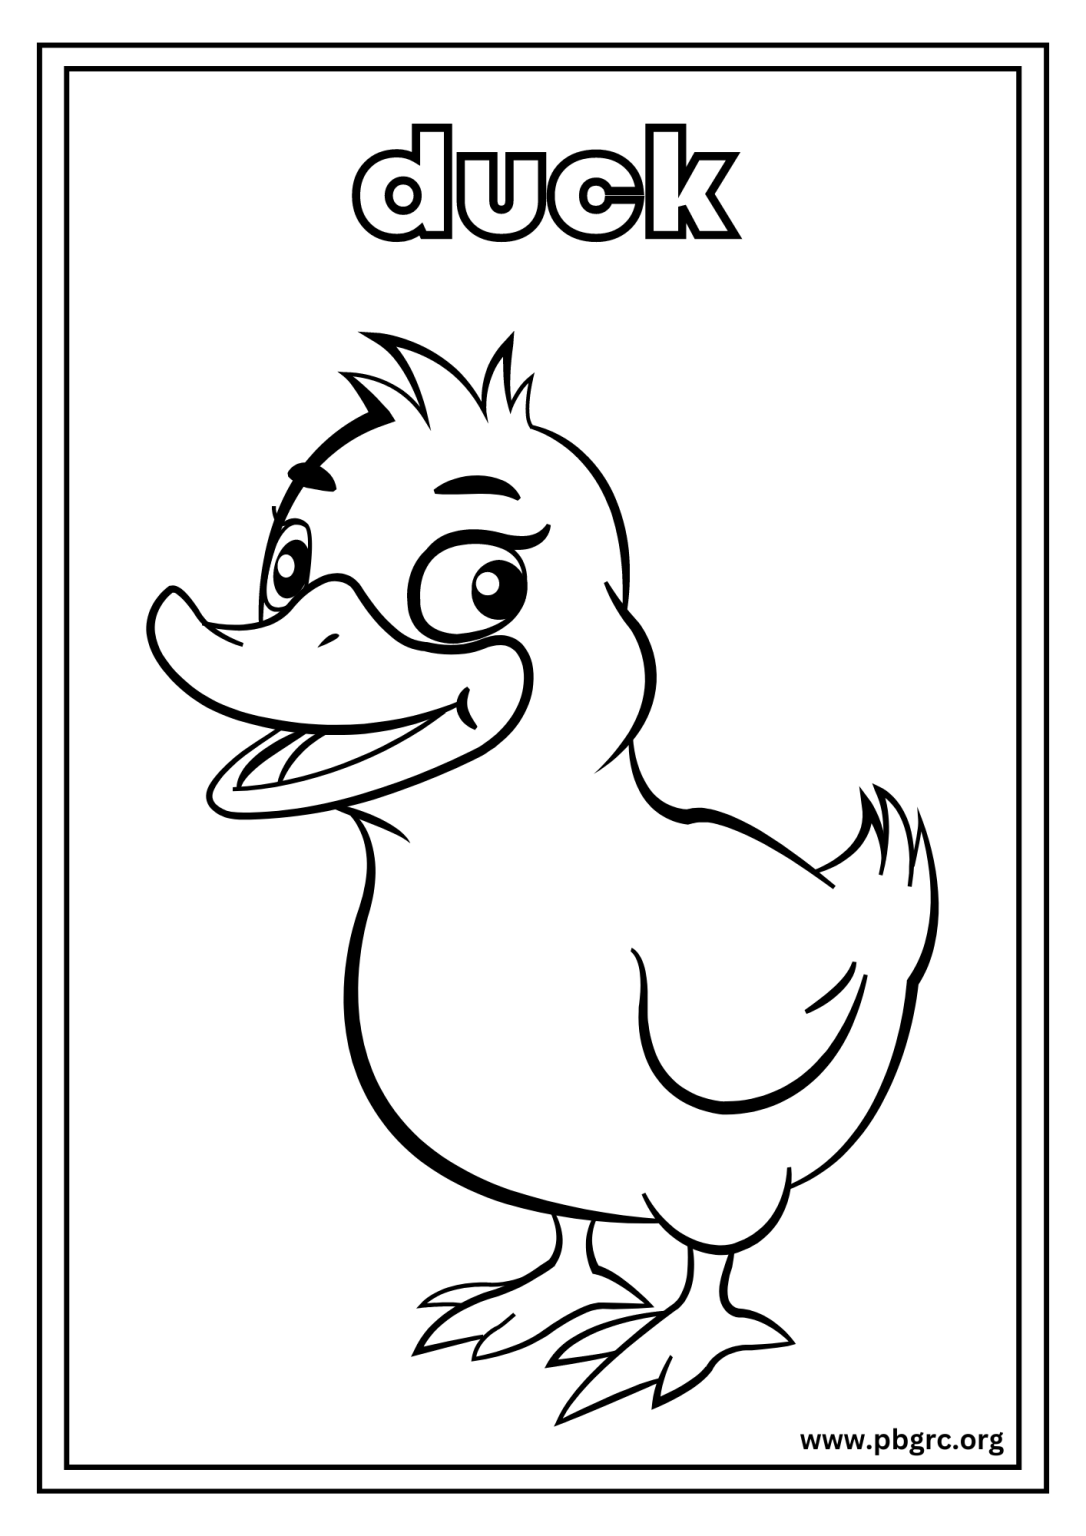 23+ Cute Animal Coloring Pages For Adults, Kids, Children